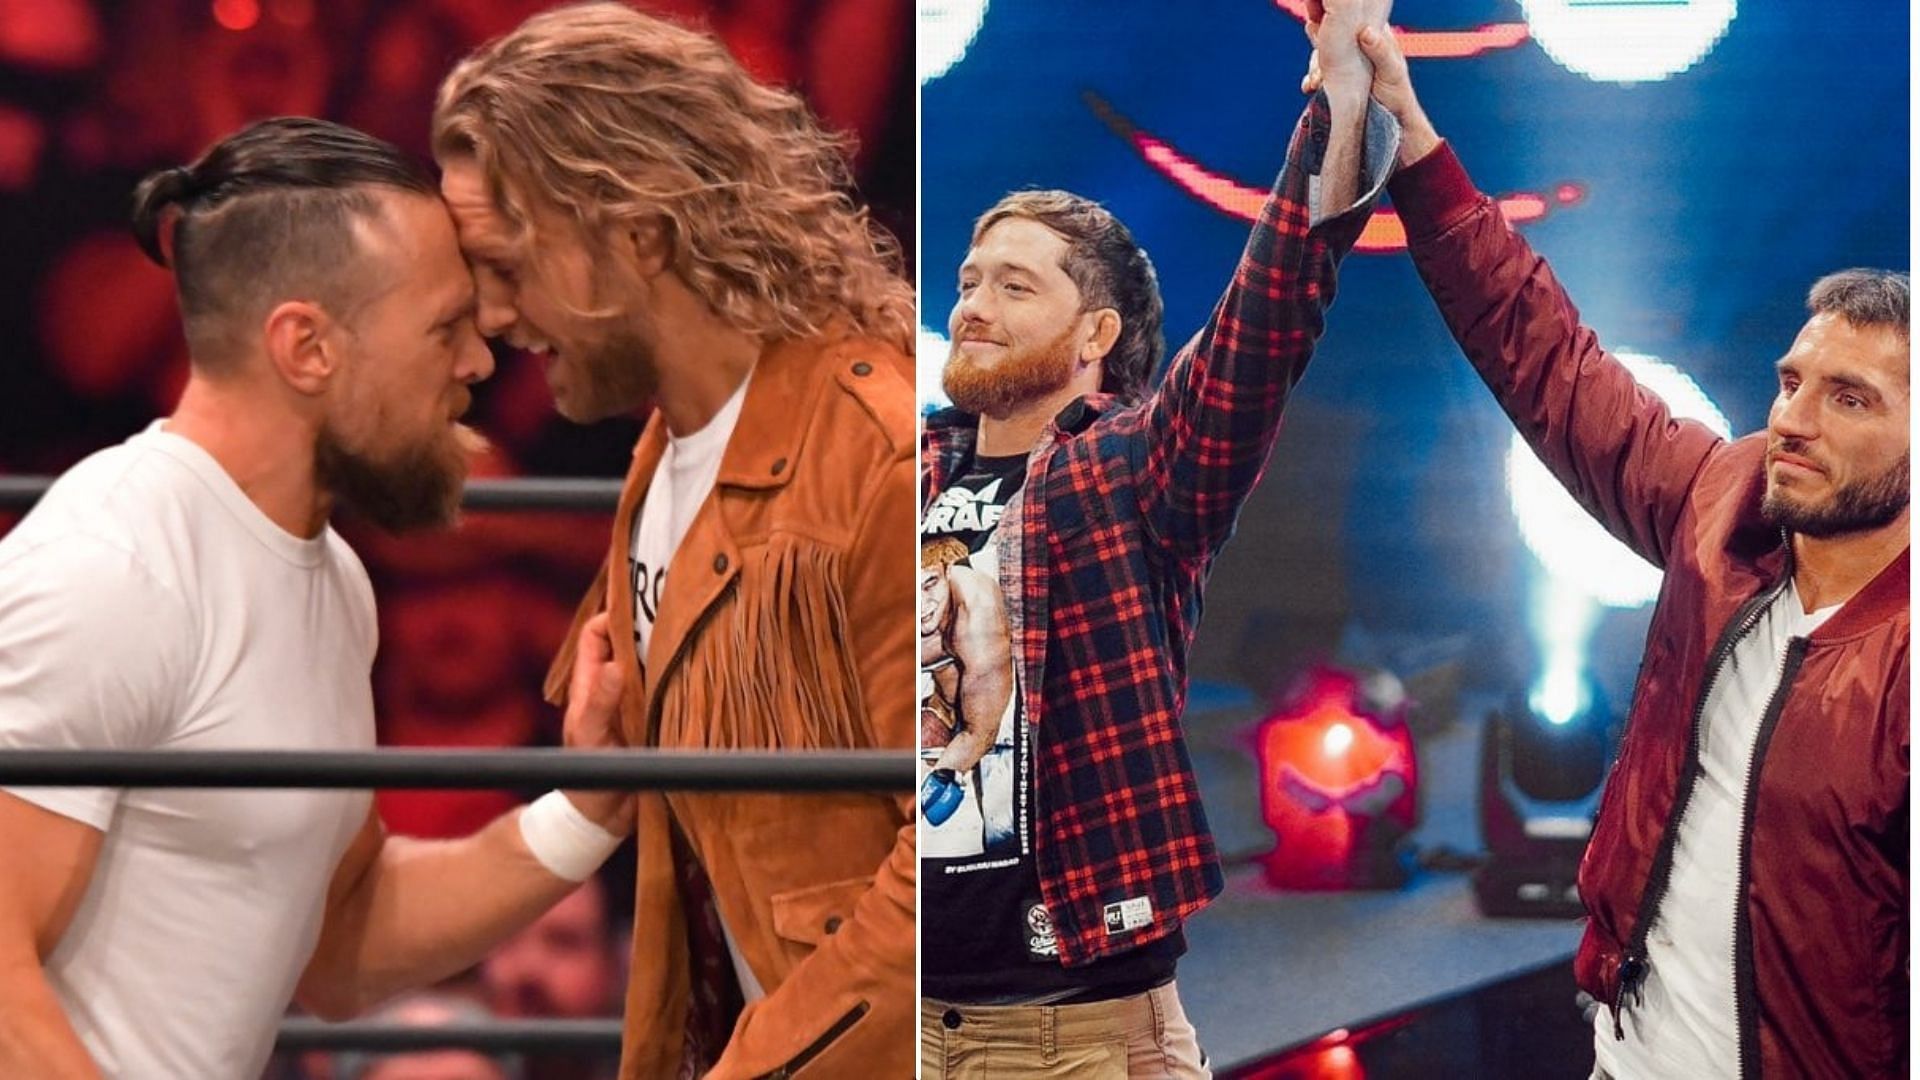 AEW Winter is Coming could play host to a world title change and surprise debuts